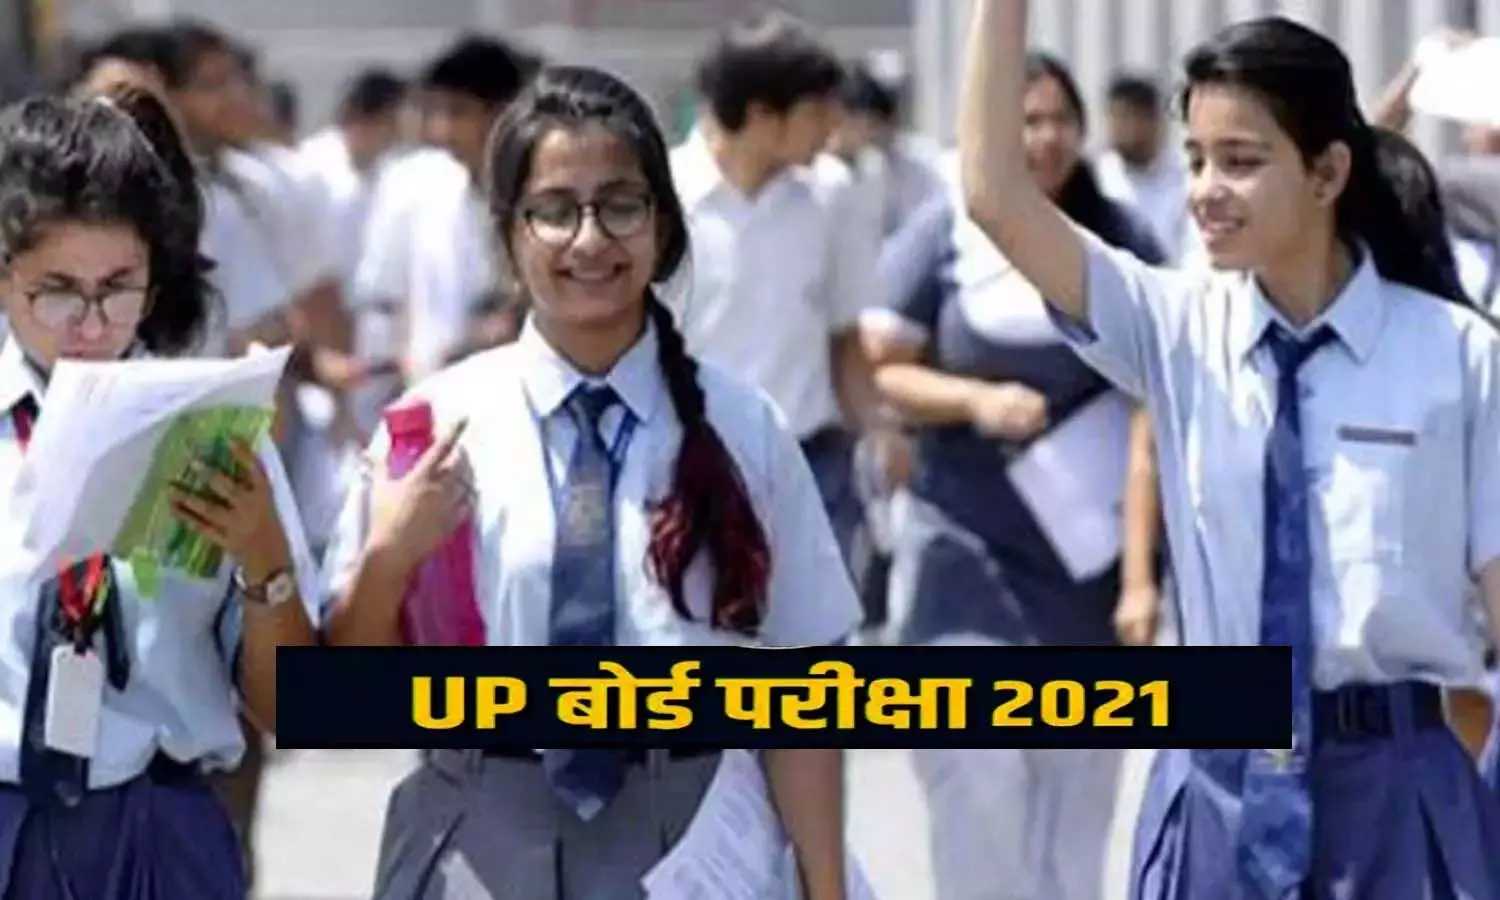 UP Board 10th Exam 2021